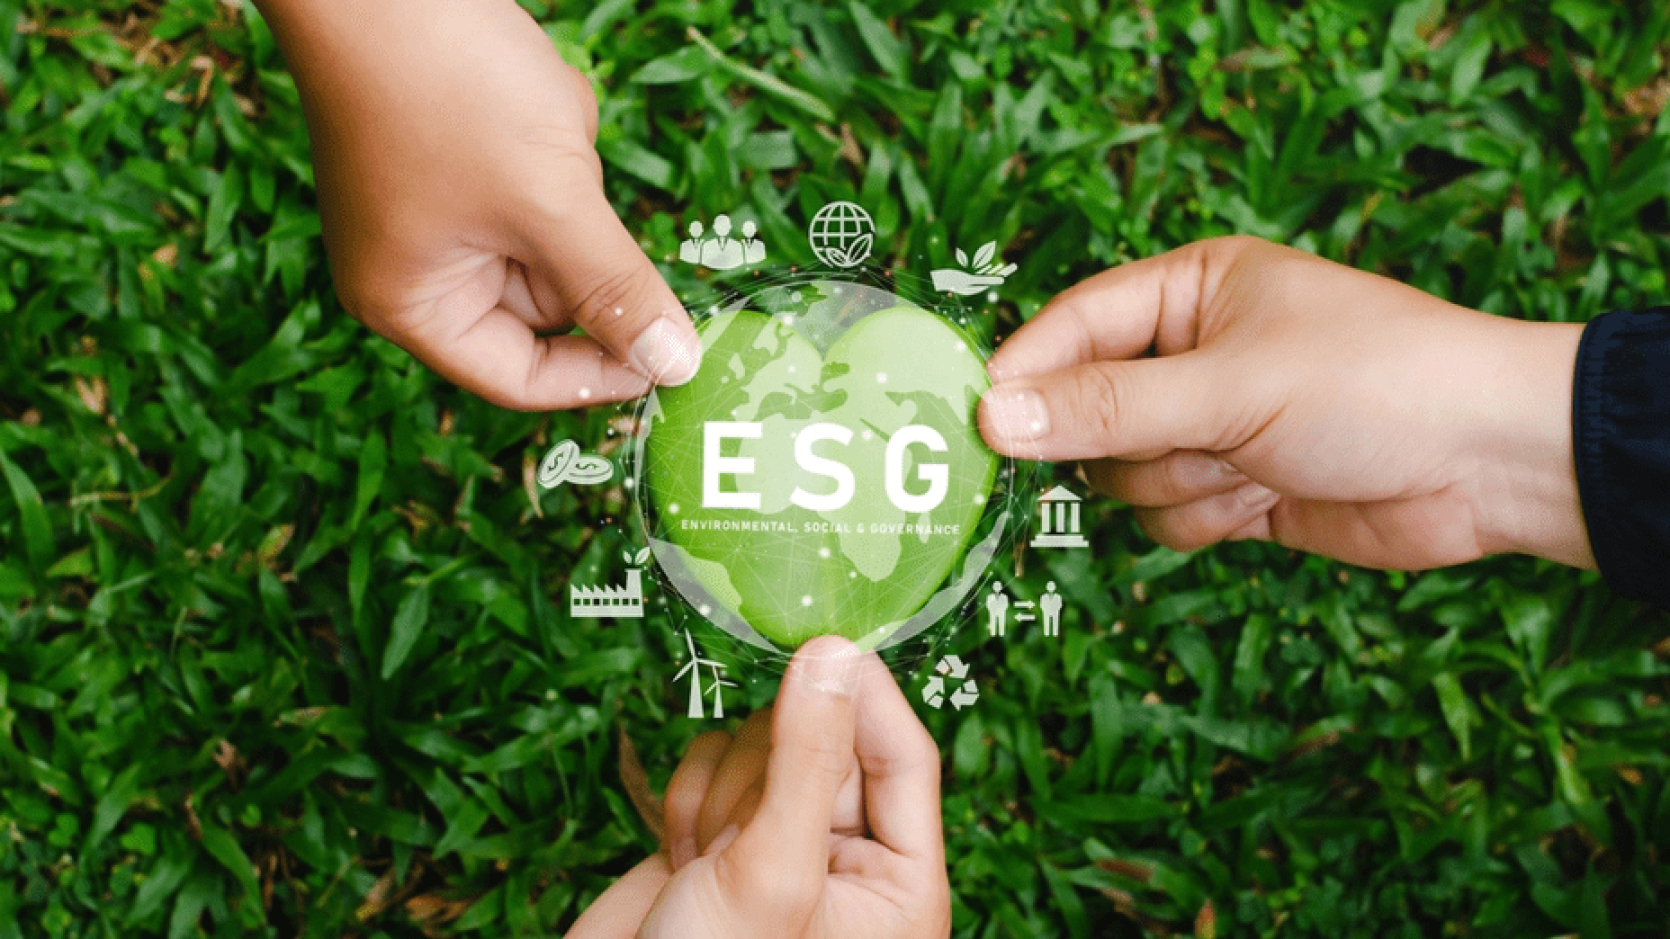 DATA MANAGEMENT: THE KEY TO SUCCESSFUL ESG REPORTING